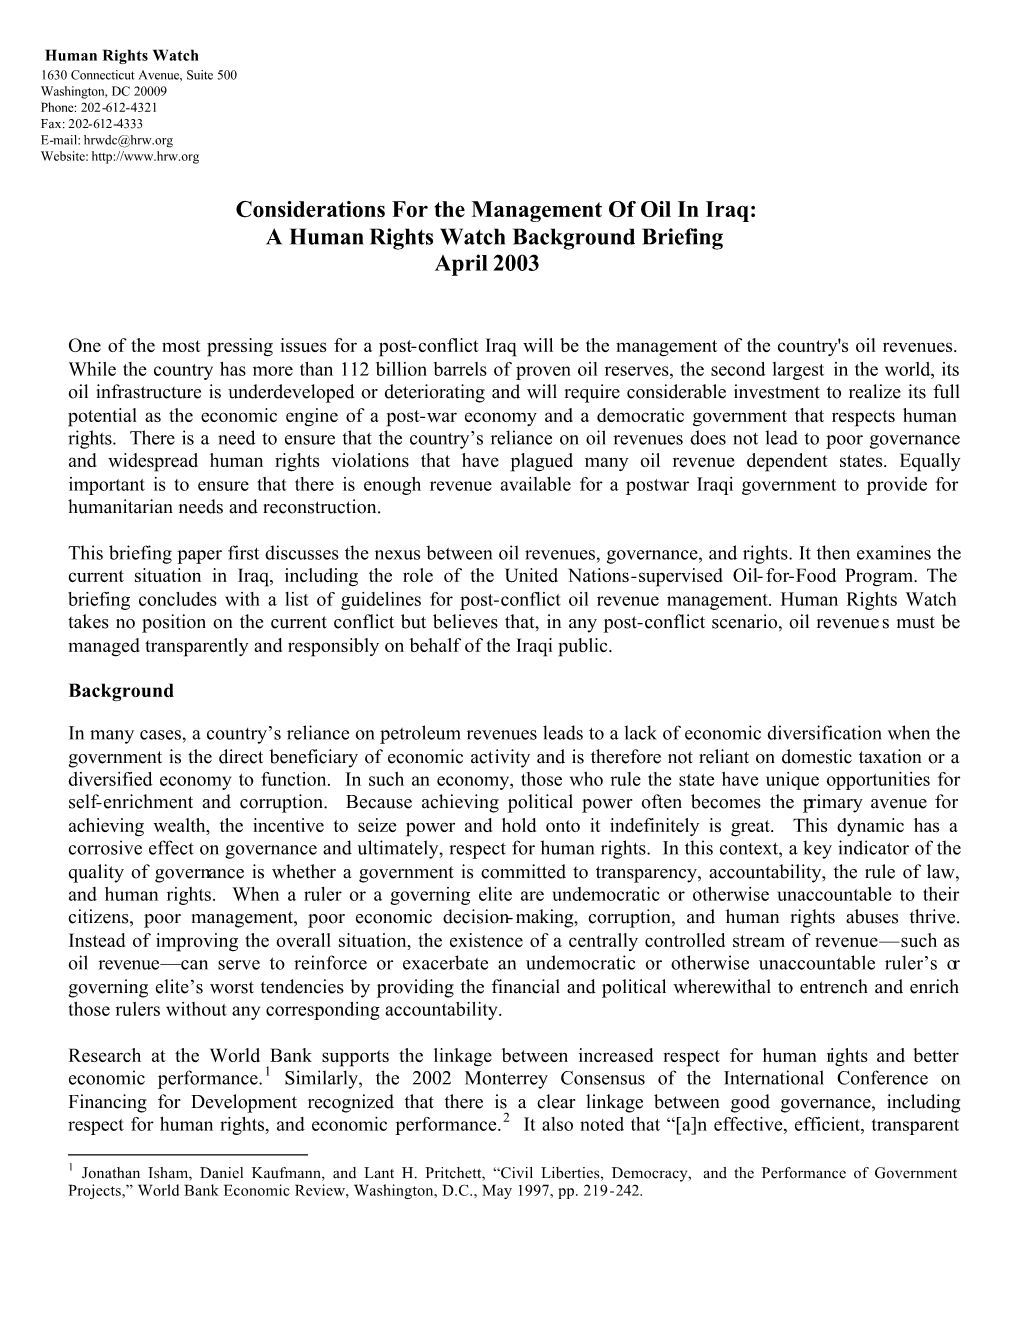 Considerations for the Management of Oil in Iraq: a Human Rights Watch Background Briefing April 2003